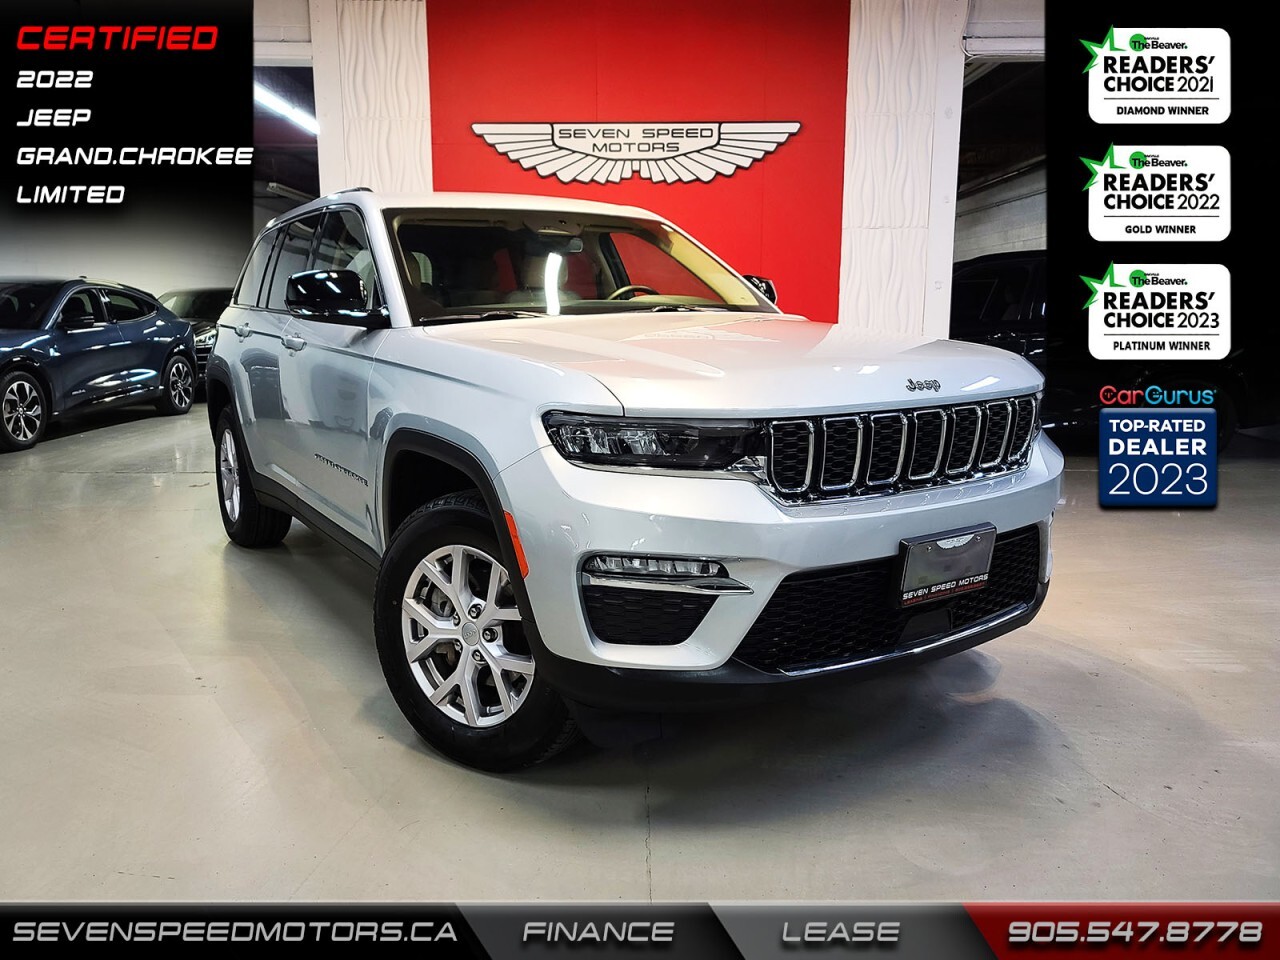 2022 Jeep Grand Cherokee CleanCarfax/Limited/Certified/Finance